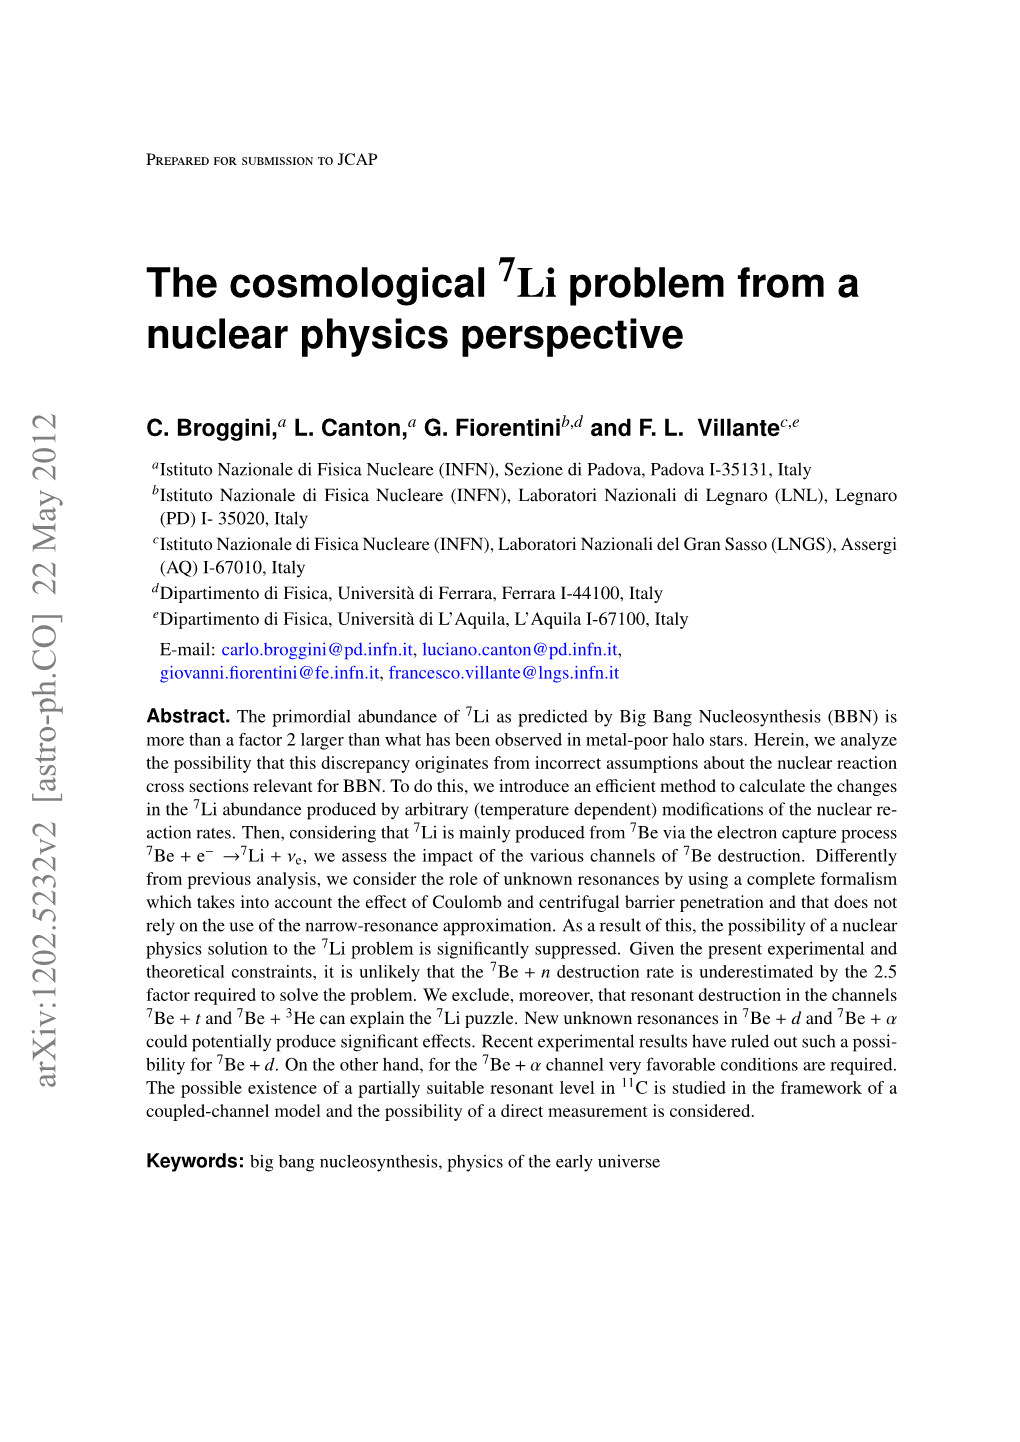 The Cosmological Li Problem from a Nuclear Physics Perspective